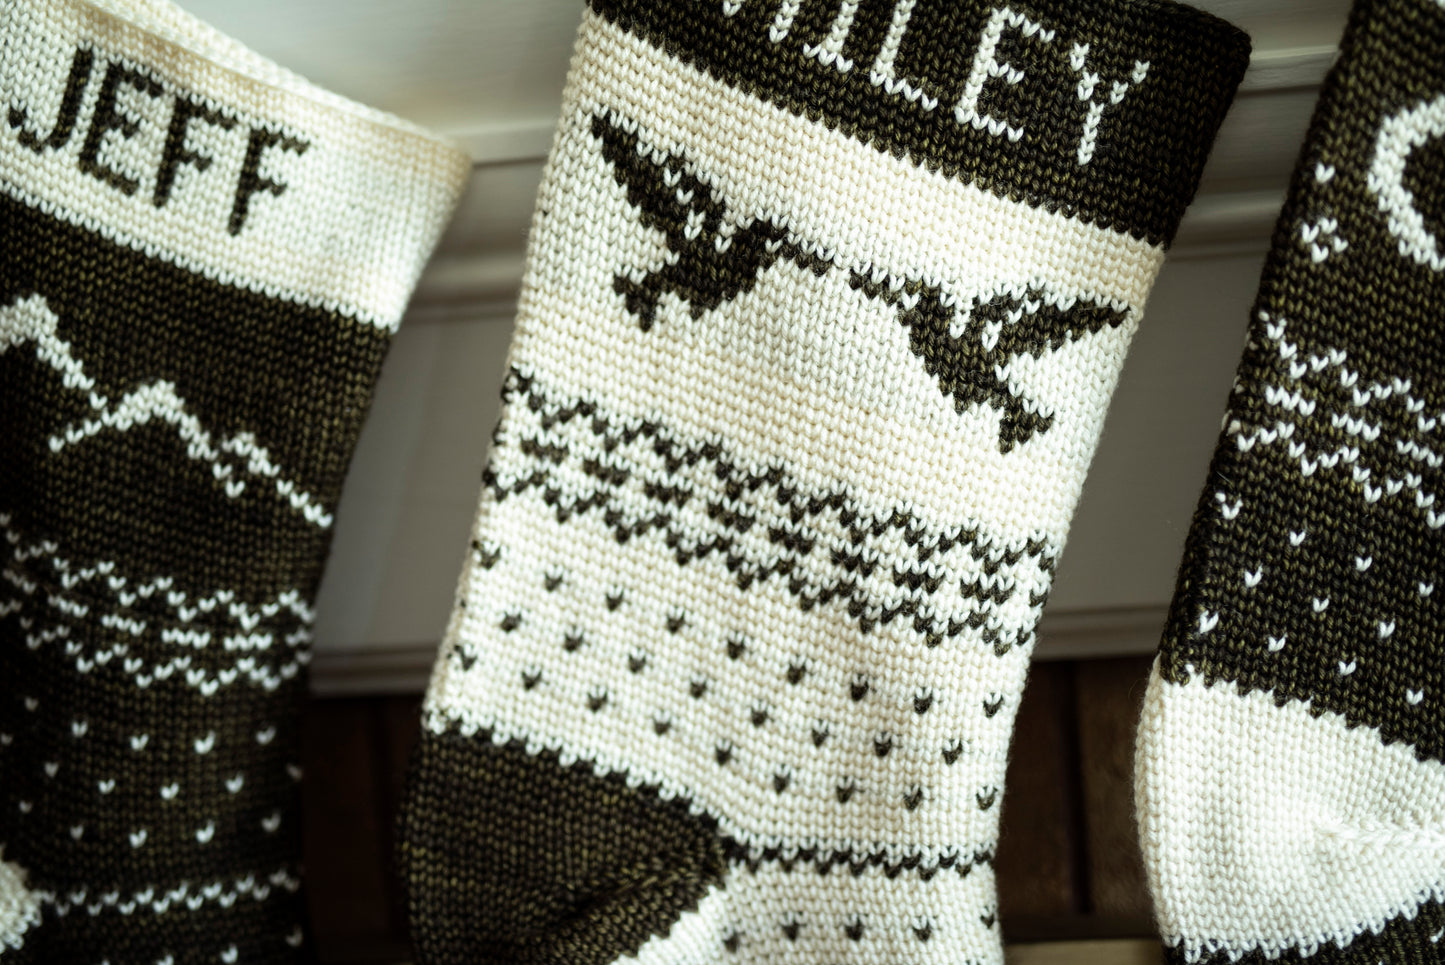 Crochet Pattern: The Forest Fair Isle Stocking